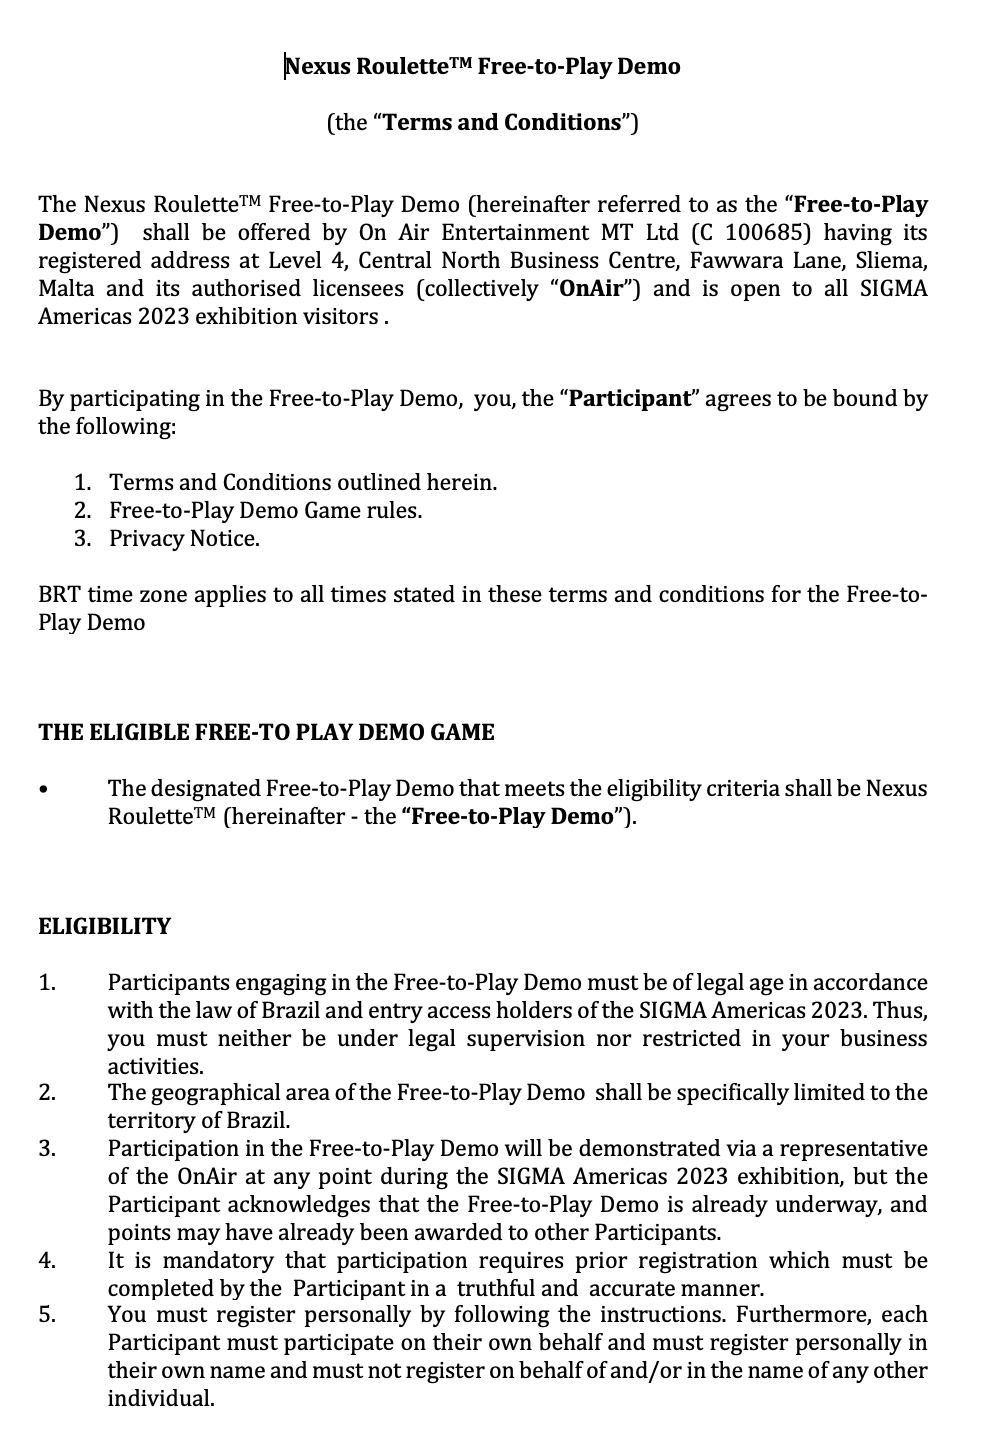 Screenshot of the terms and conditions of Nexus Roulette's free-to-play demo.